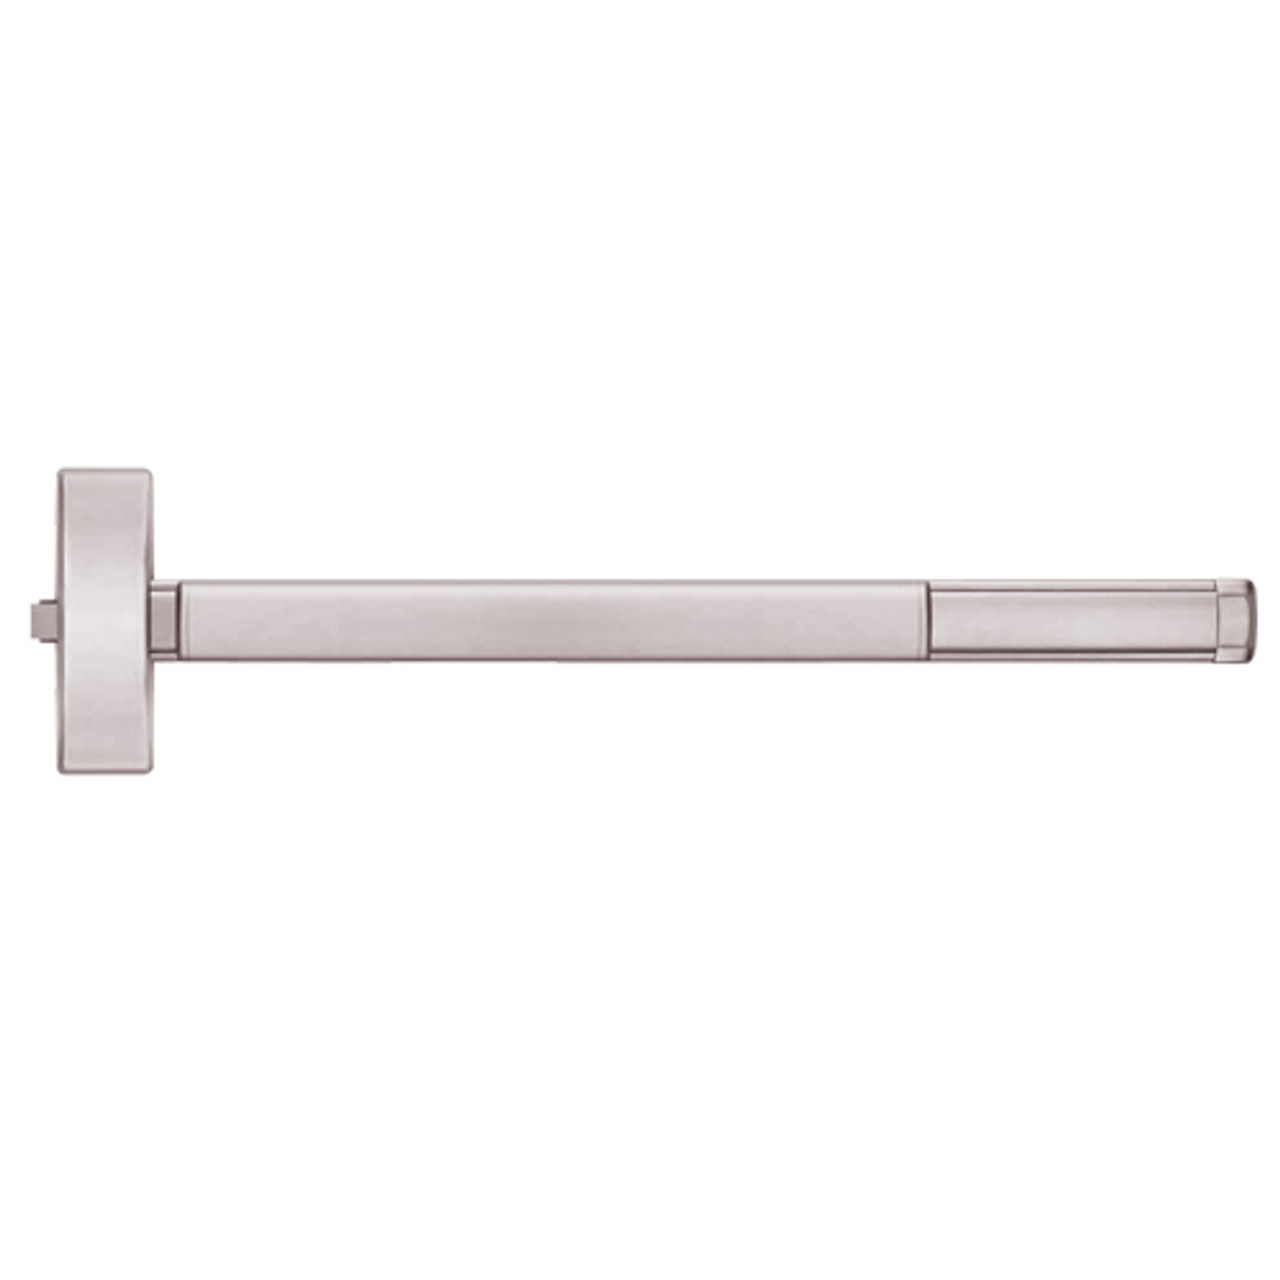 2115CD-628-36 PHI 2100 Series Non Fire Rated Apex Rim Exit Device Prepped for Thumb Piece Always Active with Cylinder Dogging in Satin Aluminum Finish